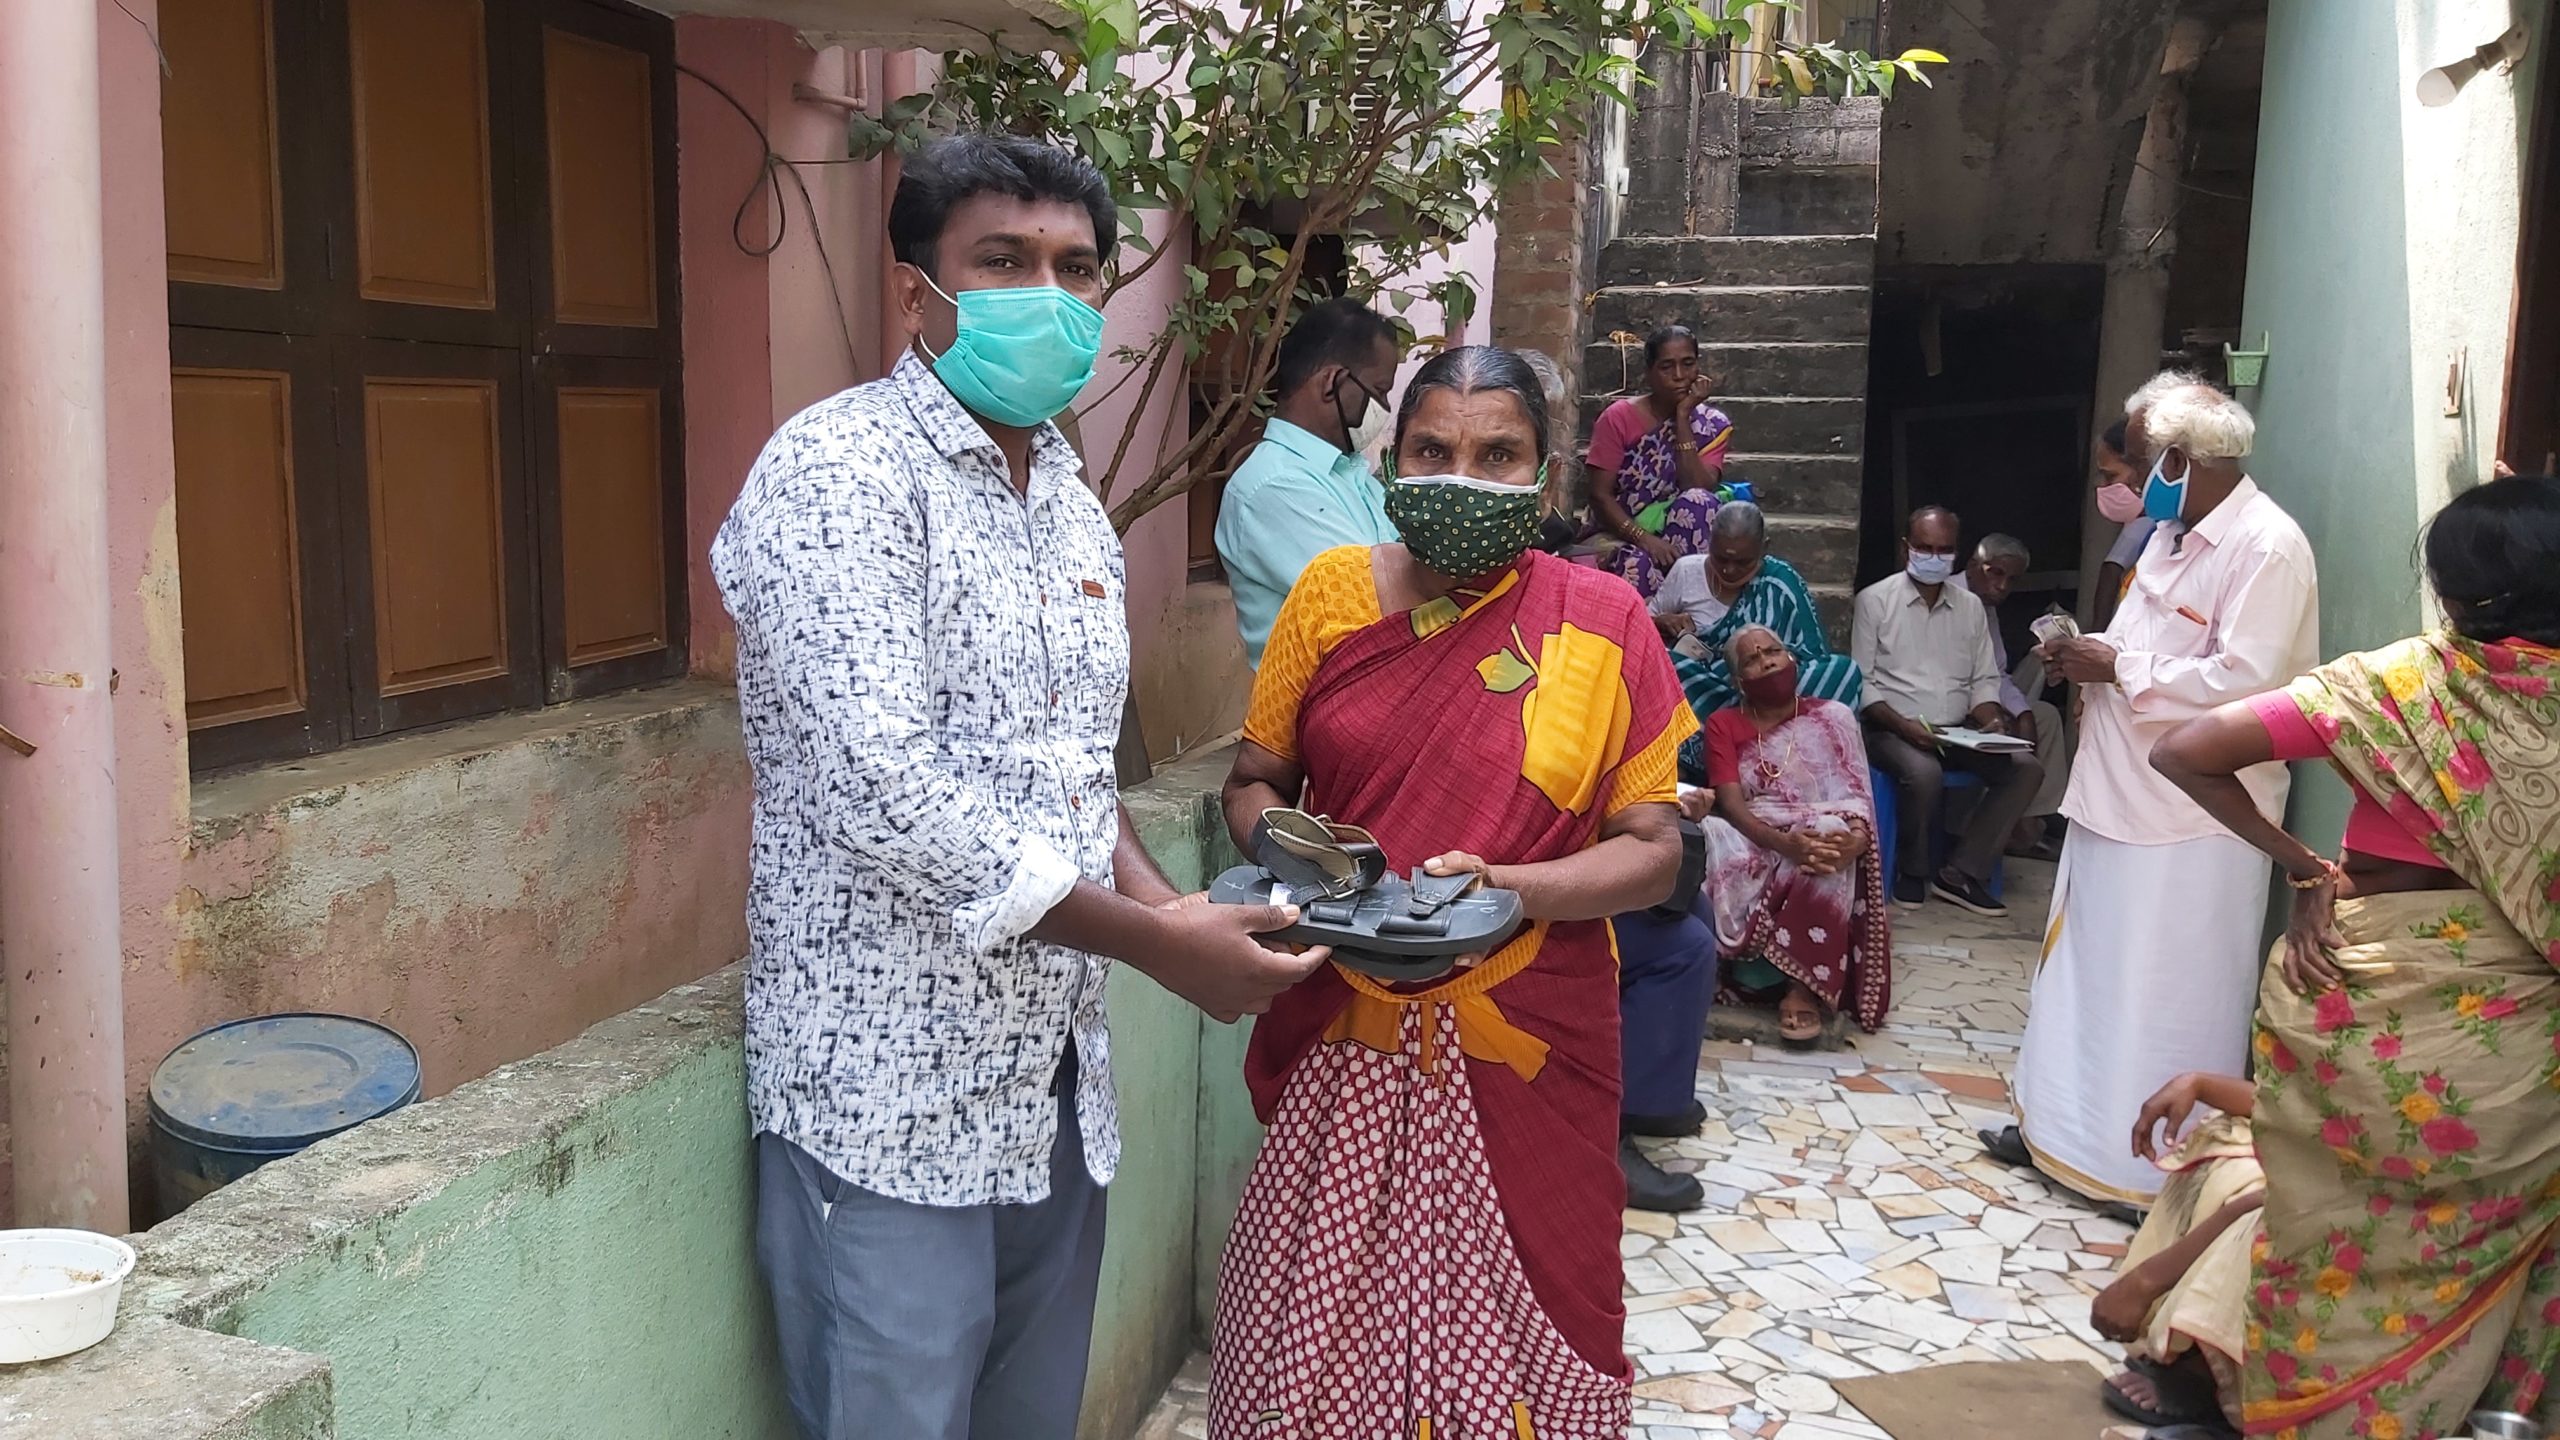 Praying through leprosy, one day at a time – Pushparani’s story